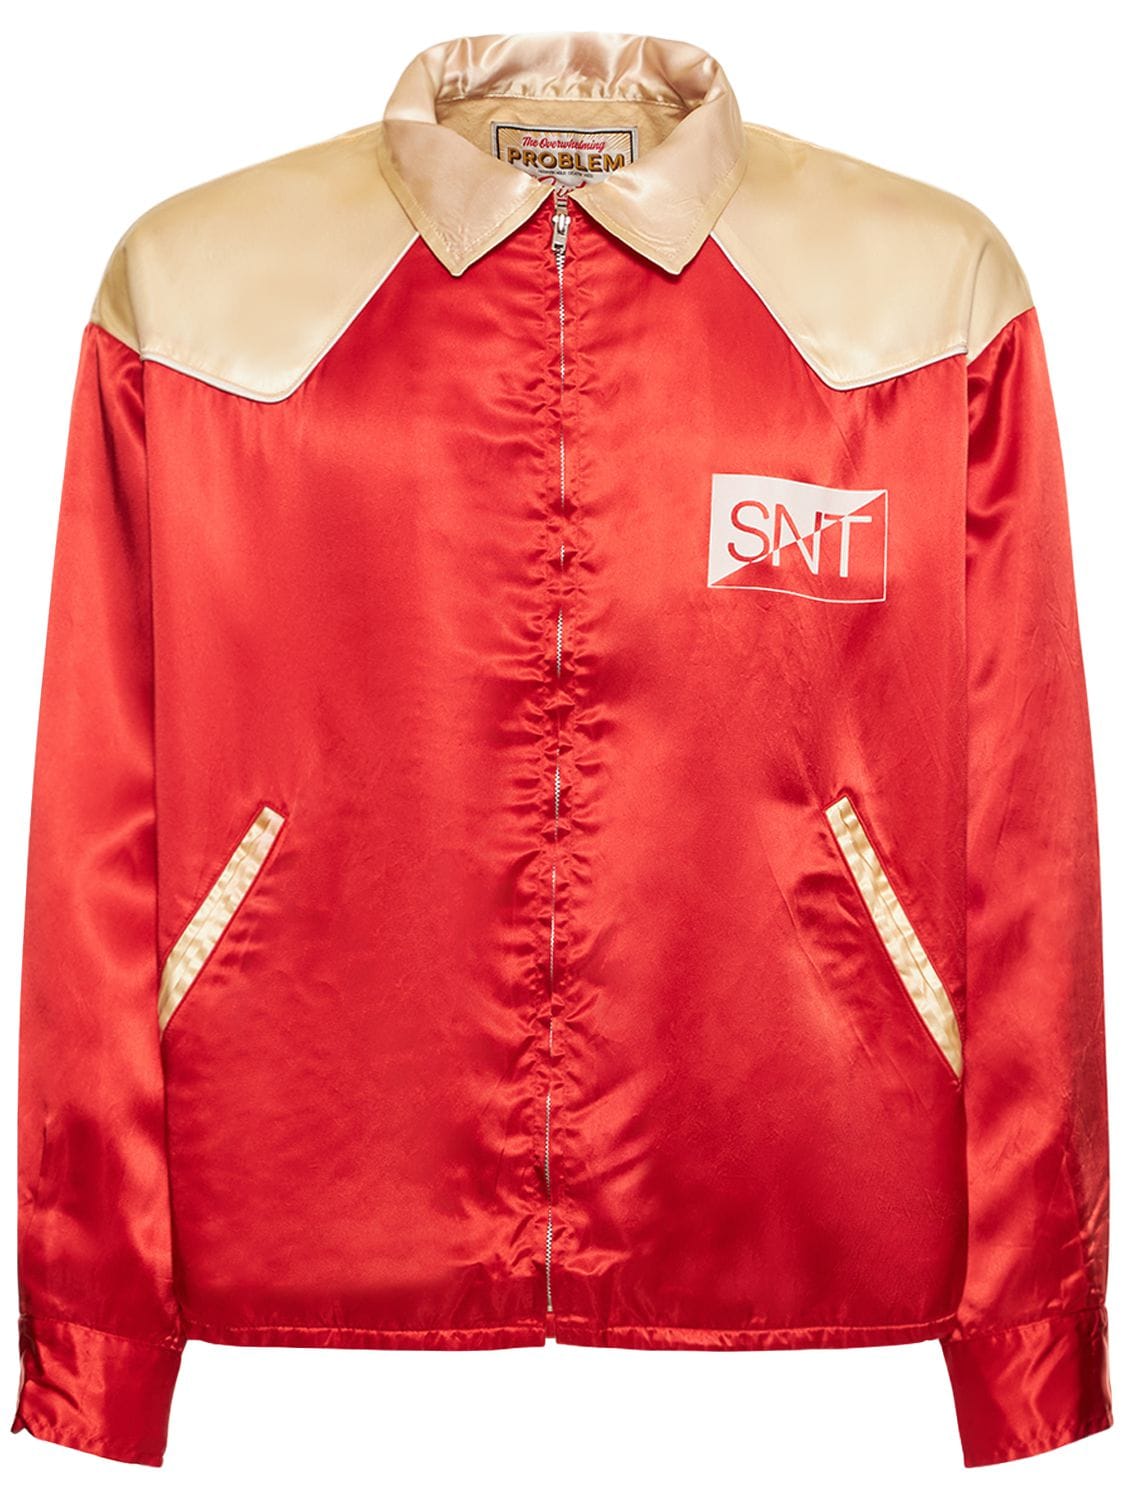 Saint Michael Disorder Of The Divine Logo Jacket In Red,multi